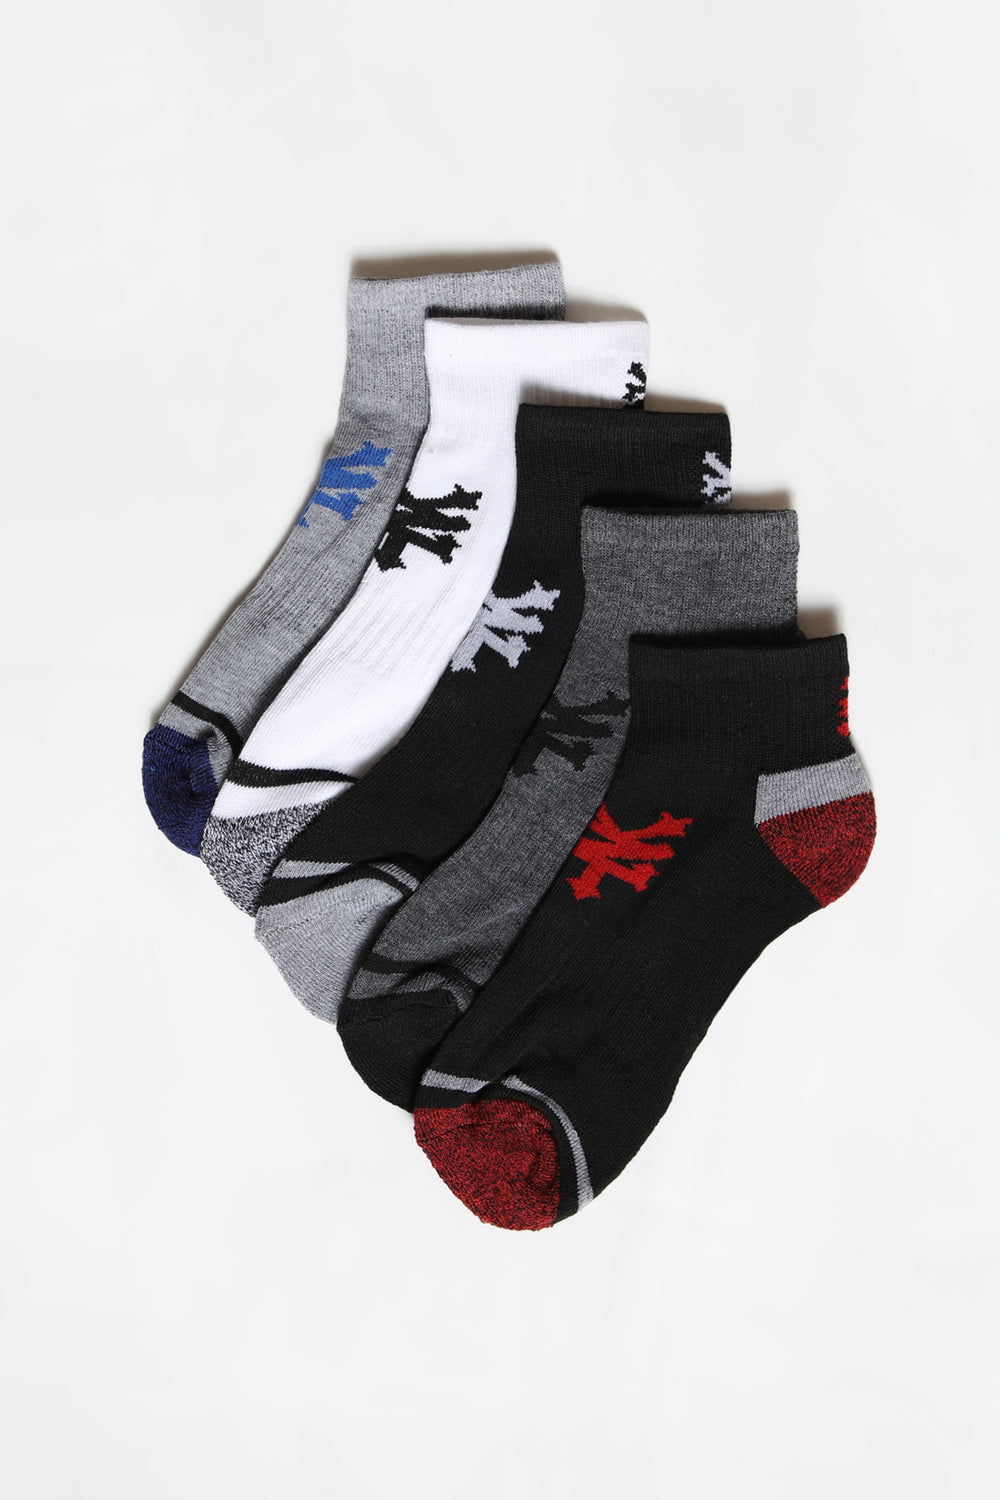 Zoo York Mens 5-Pack Athletic Ankle Socks Black with White